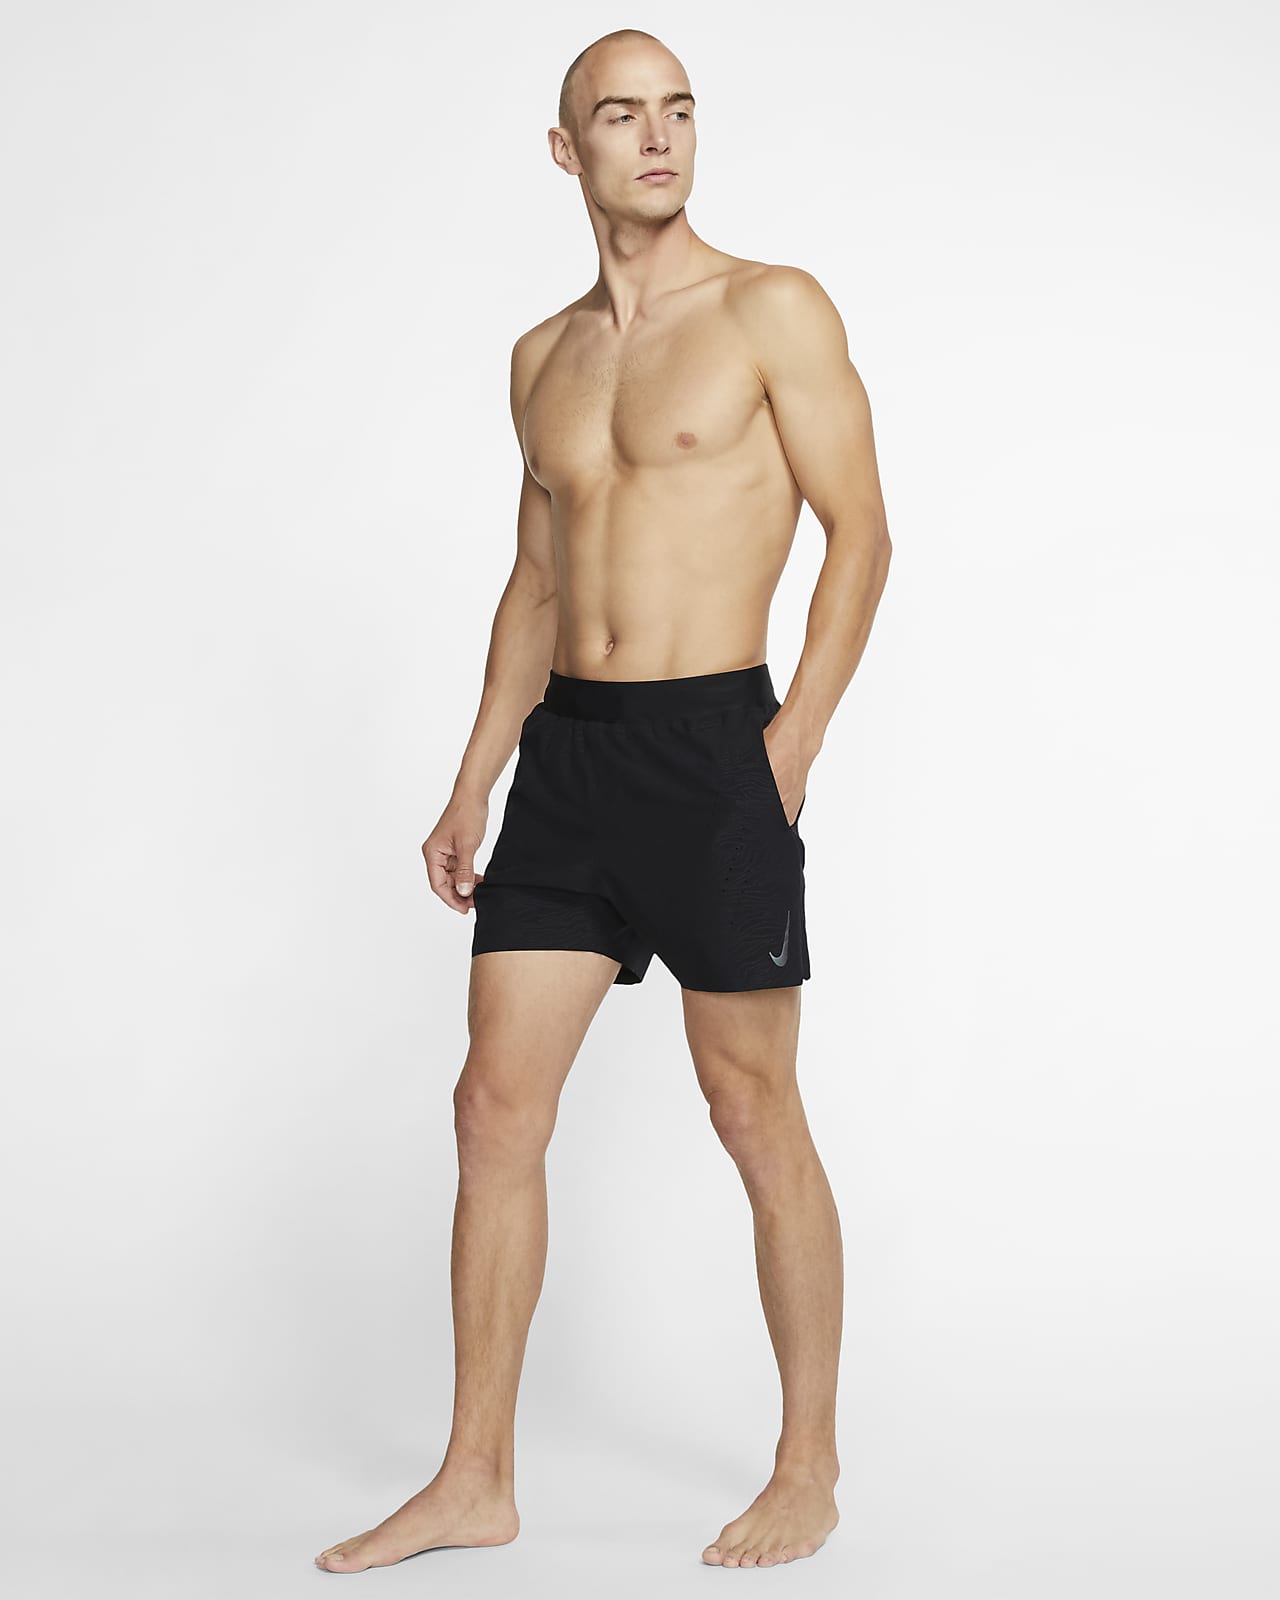 nike volleyball shorts men's